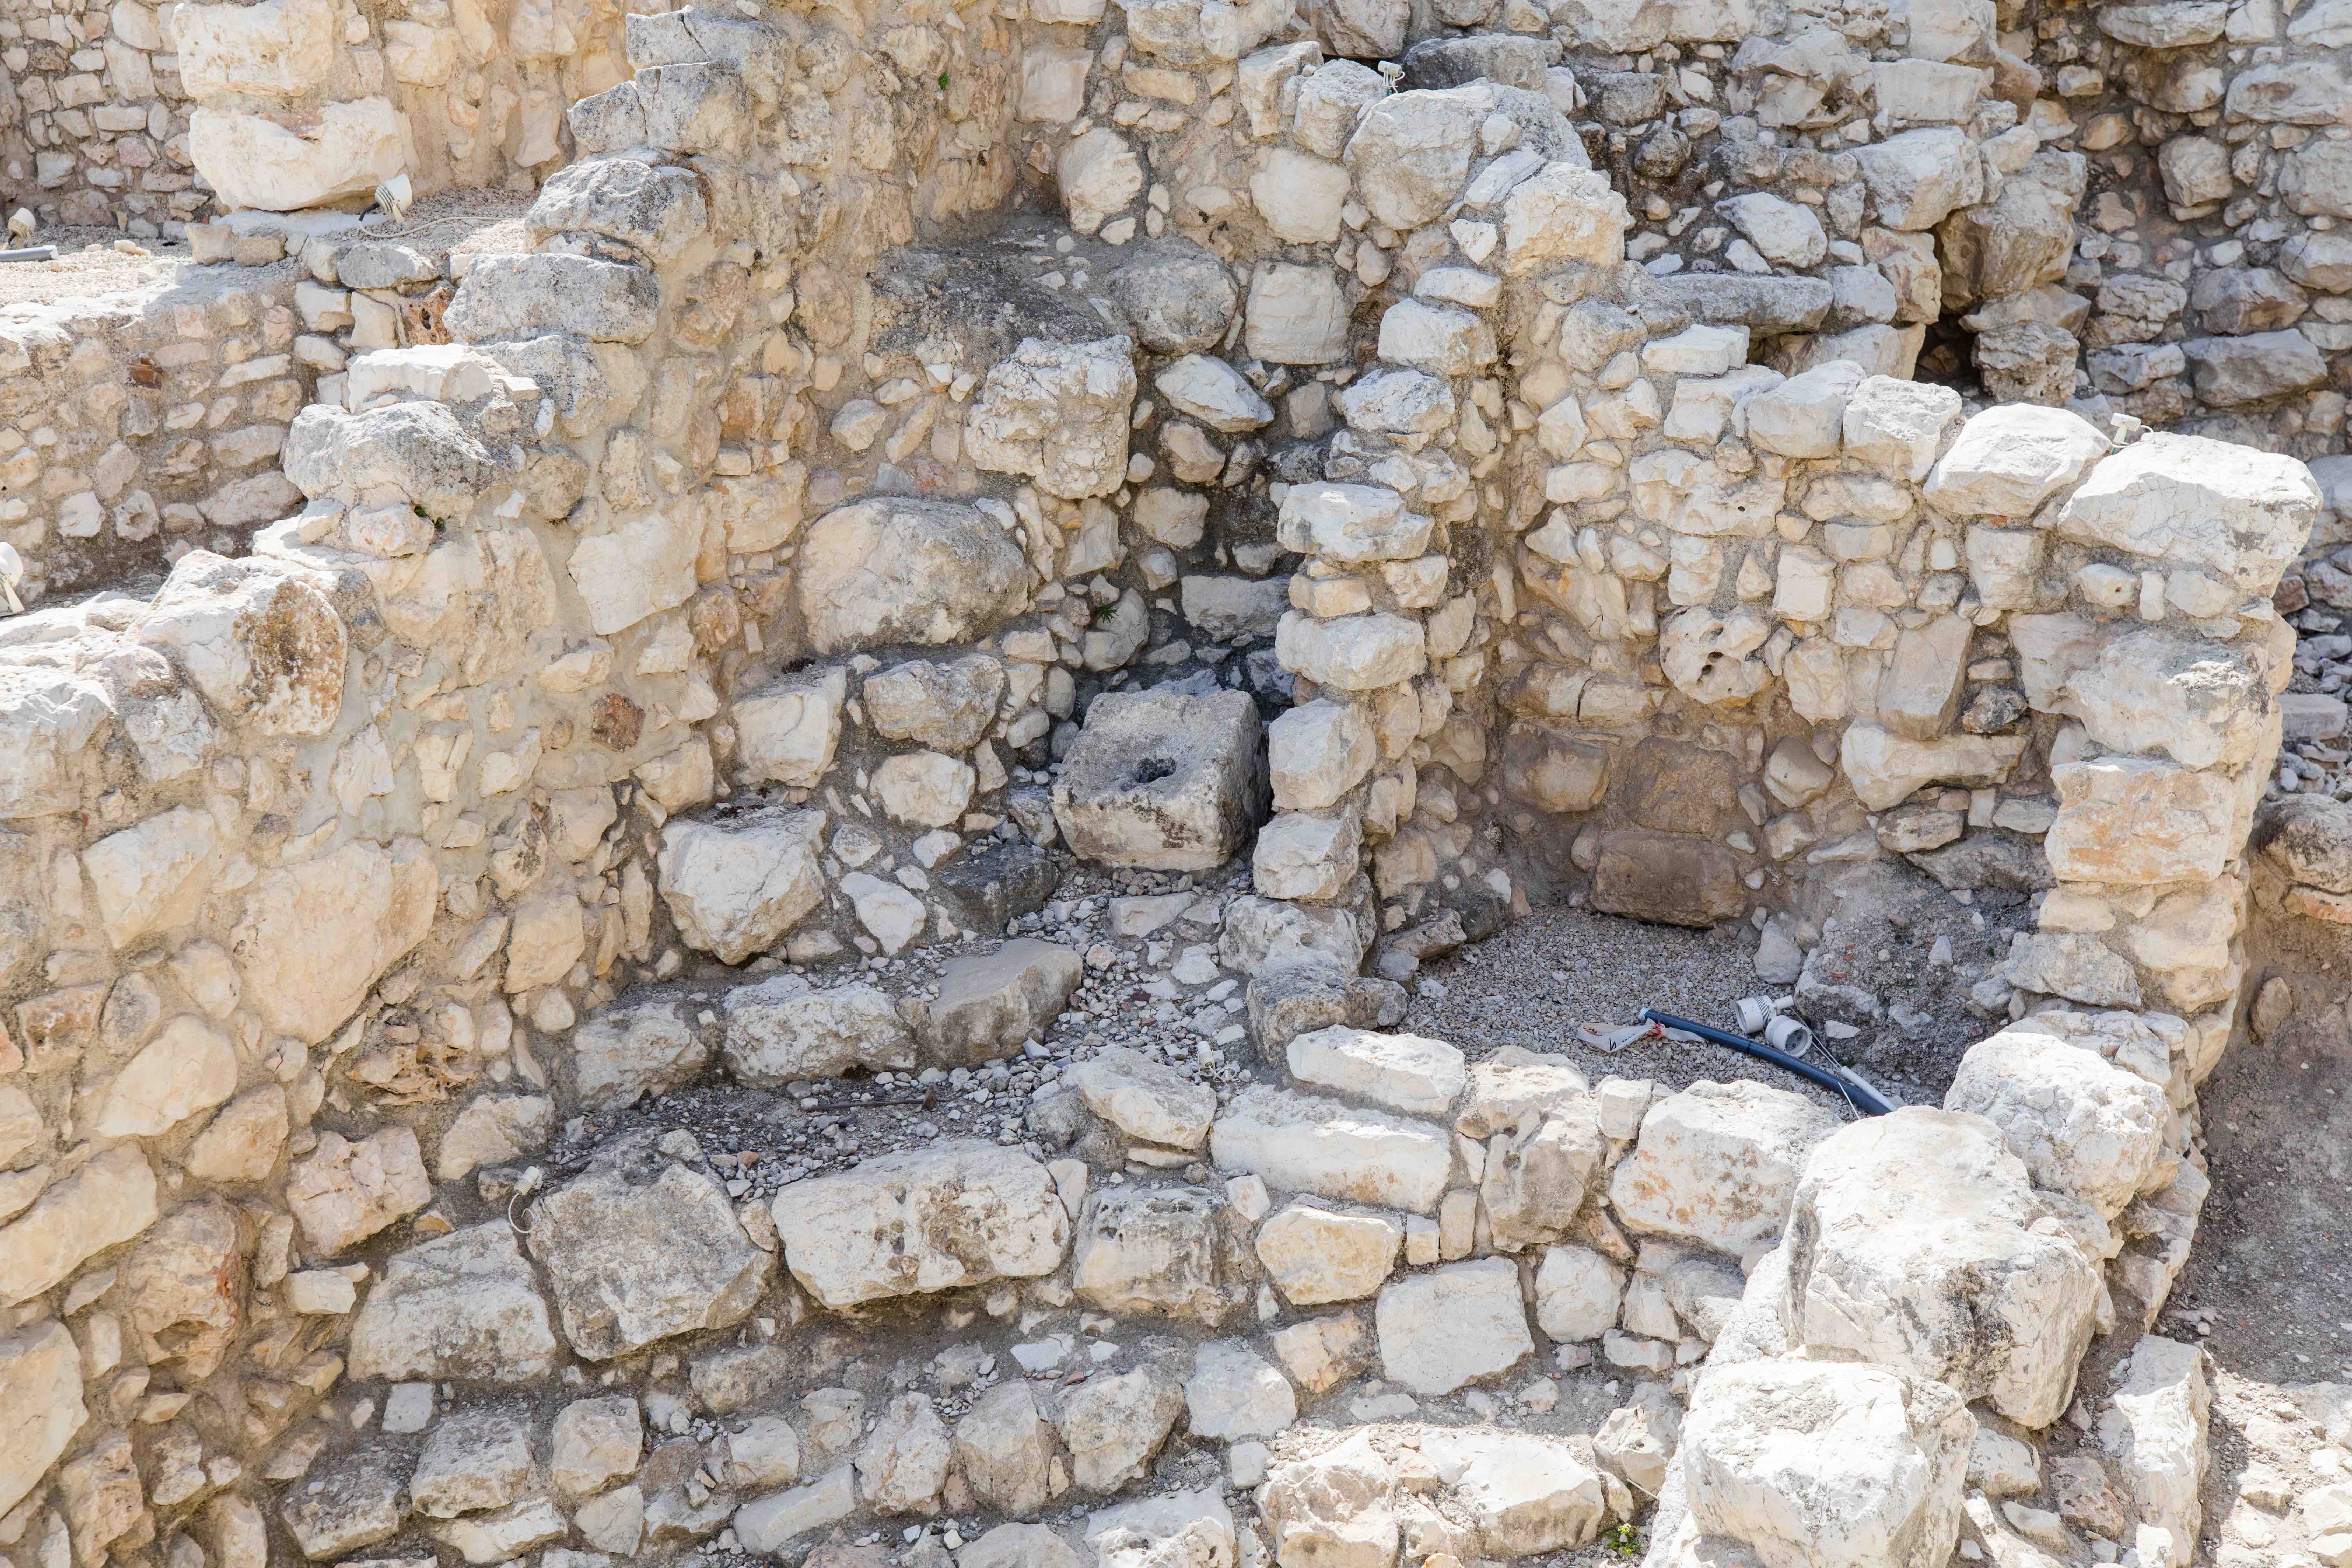 An ancient toilet carved from stone sits above an ancient septic tank in the City of David